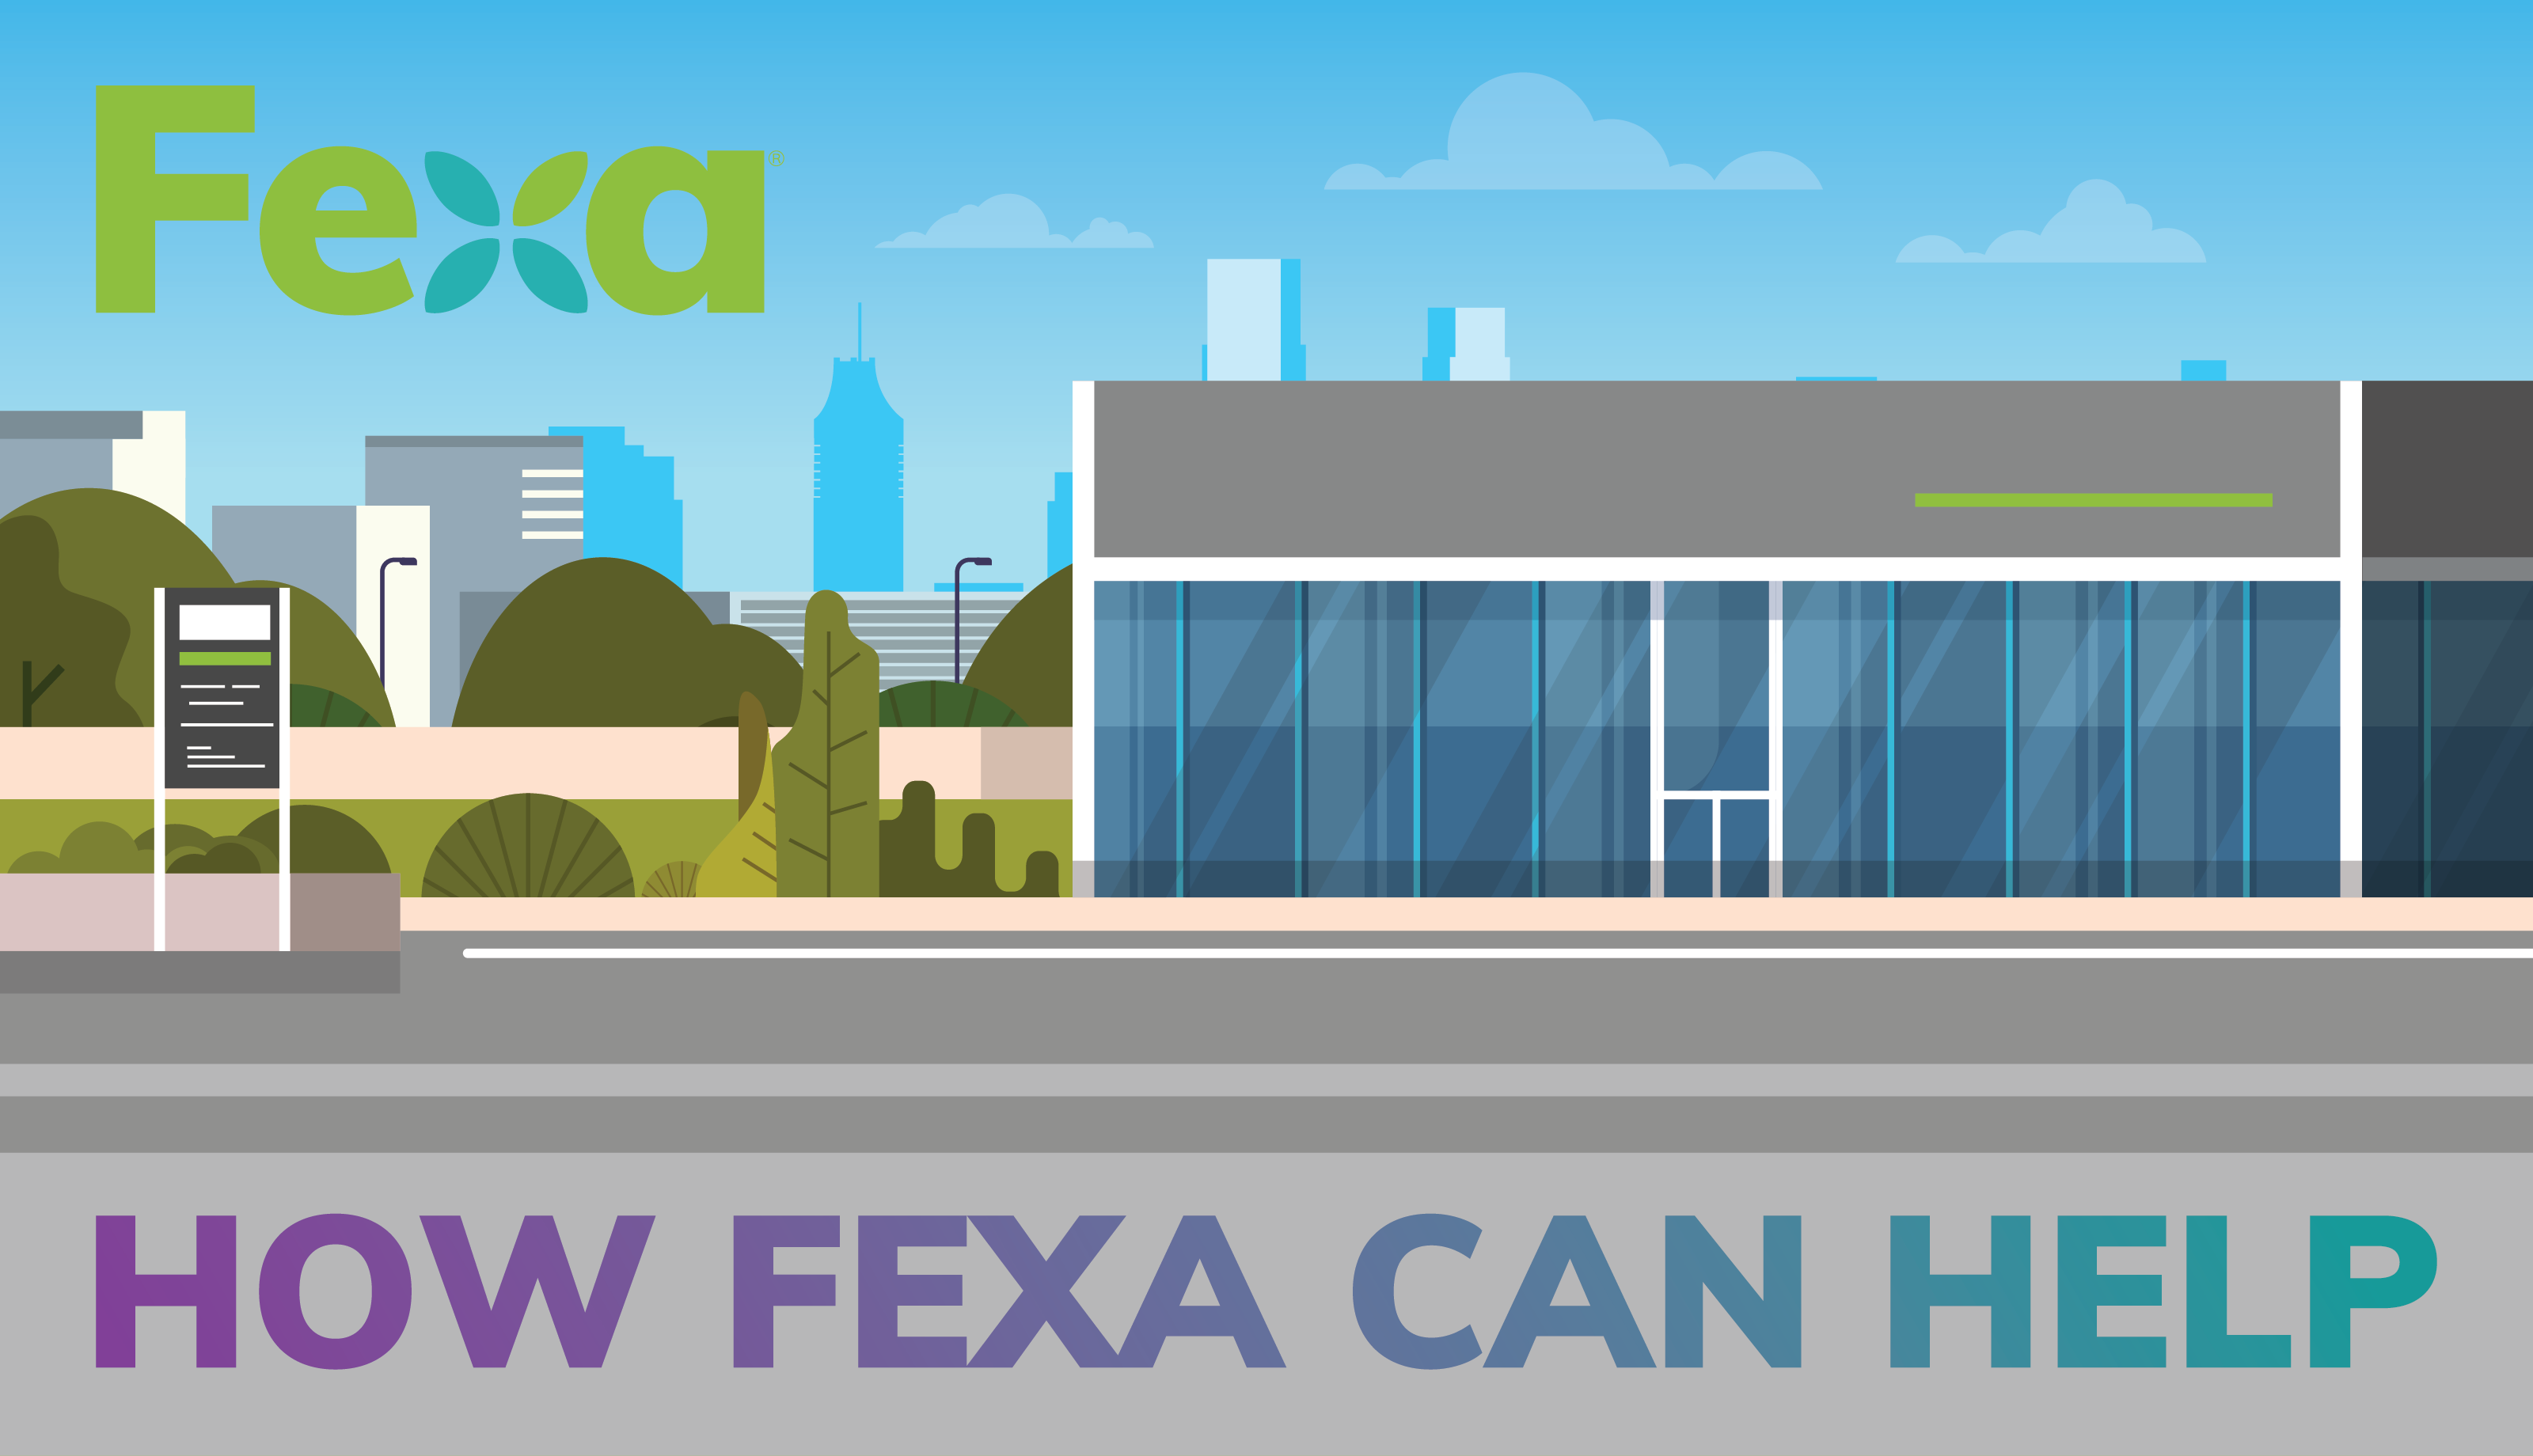 With the Fexa app, your managers can coordinate your facility maintenance quickly and easily